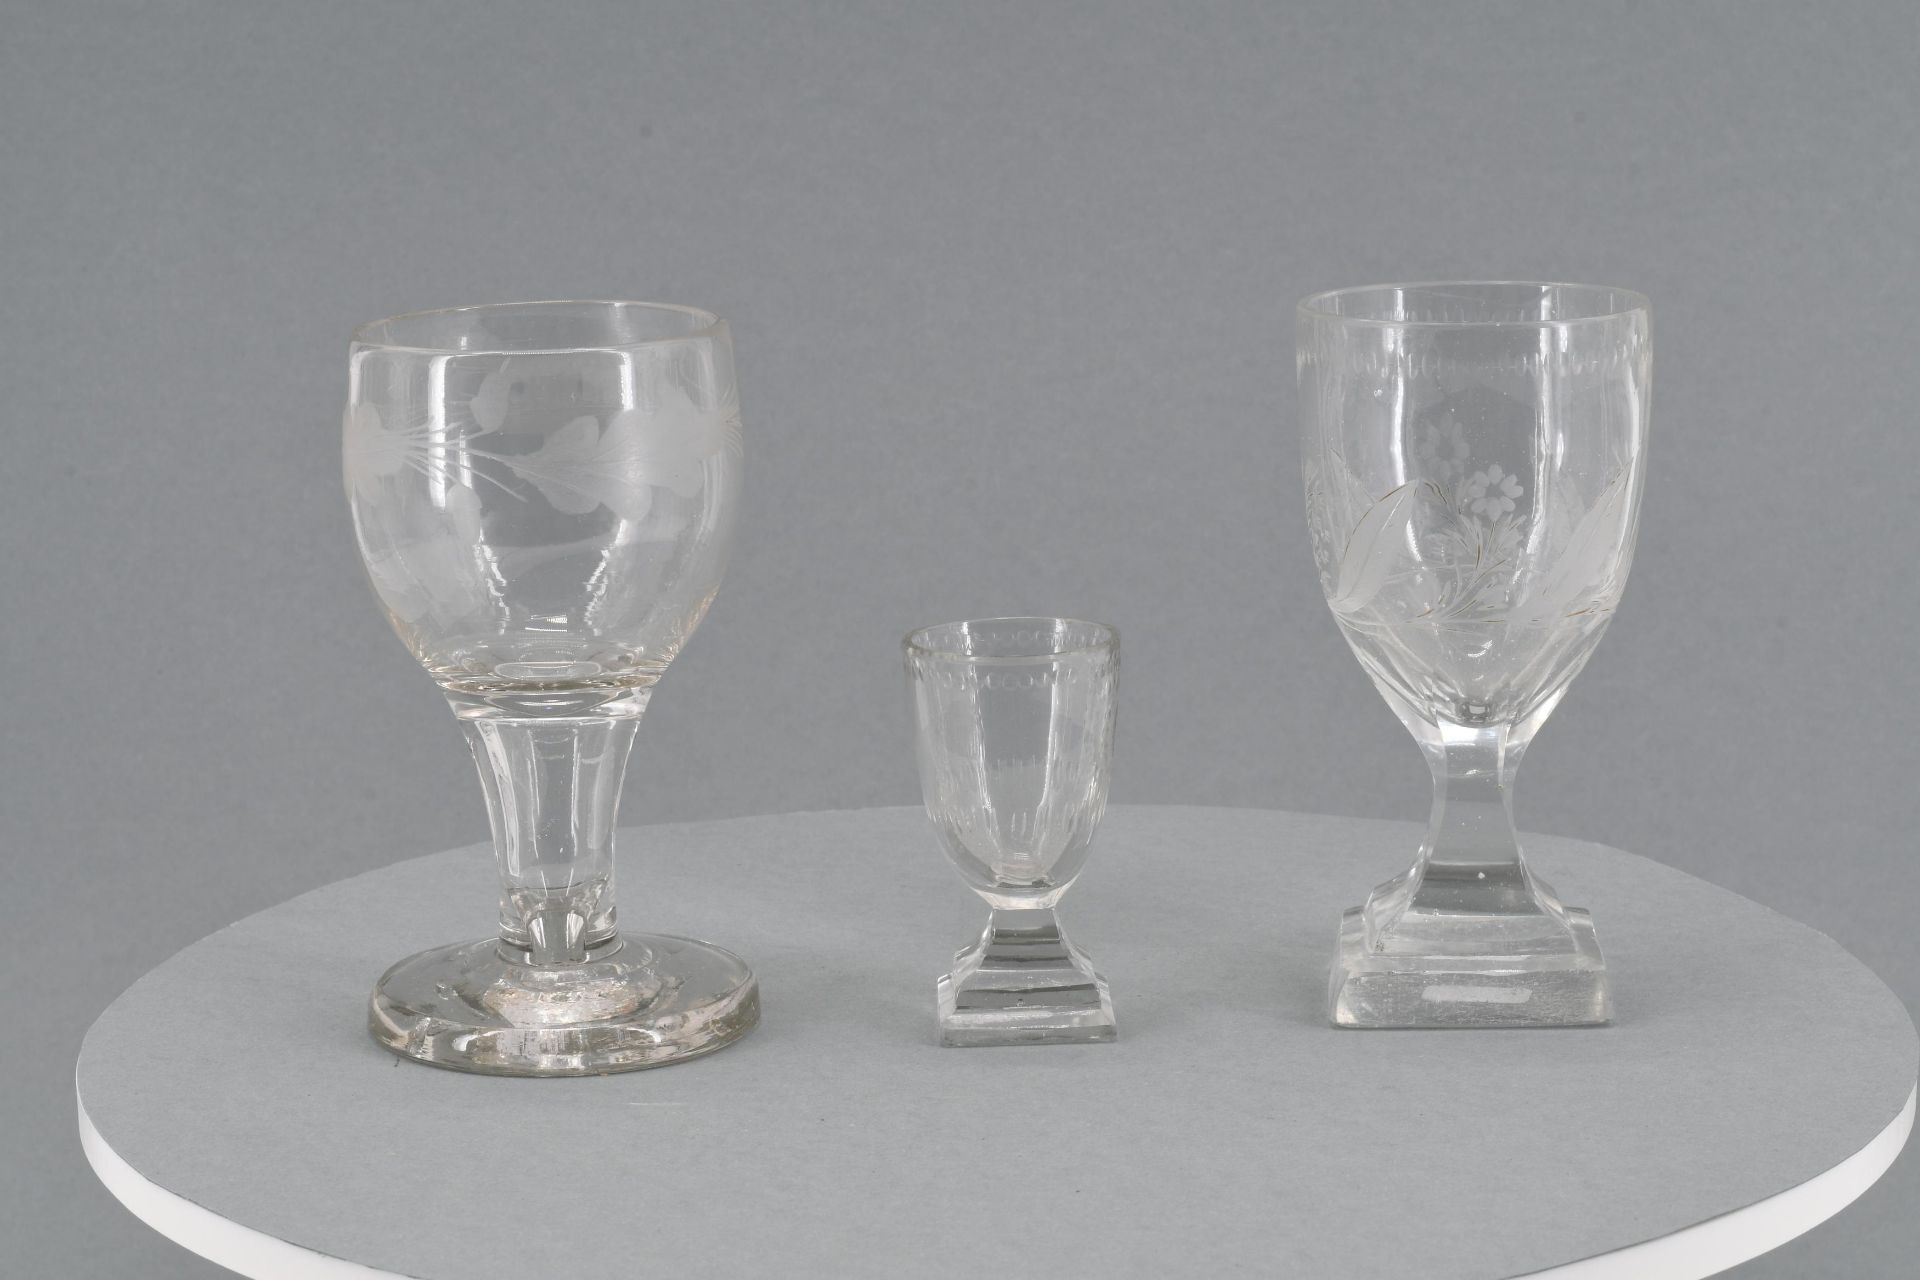 Goblet with monogram and schnapps glass with blue rim - Image 9 of 15